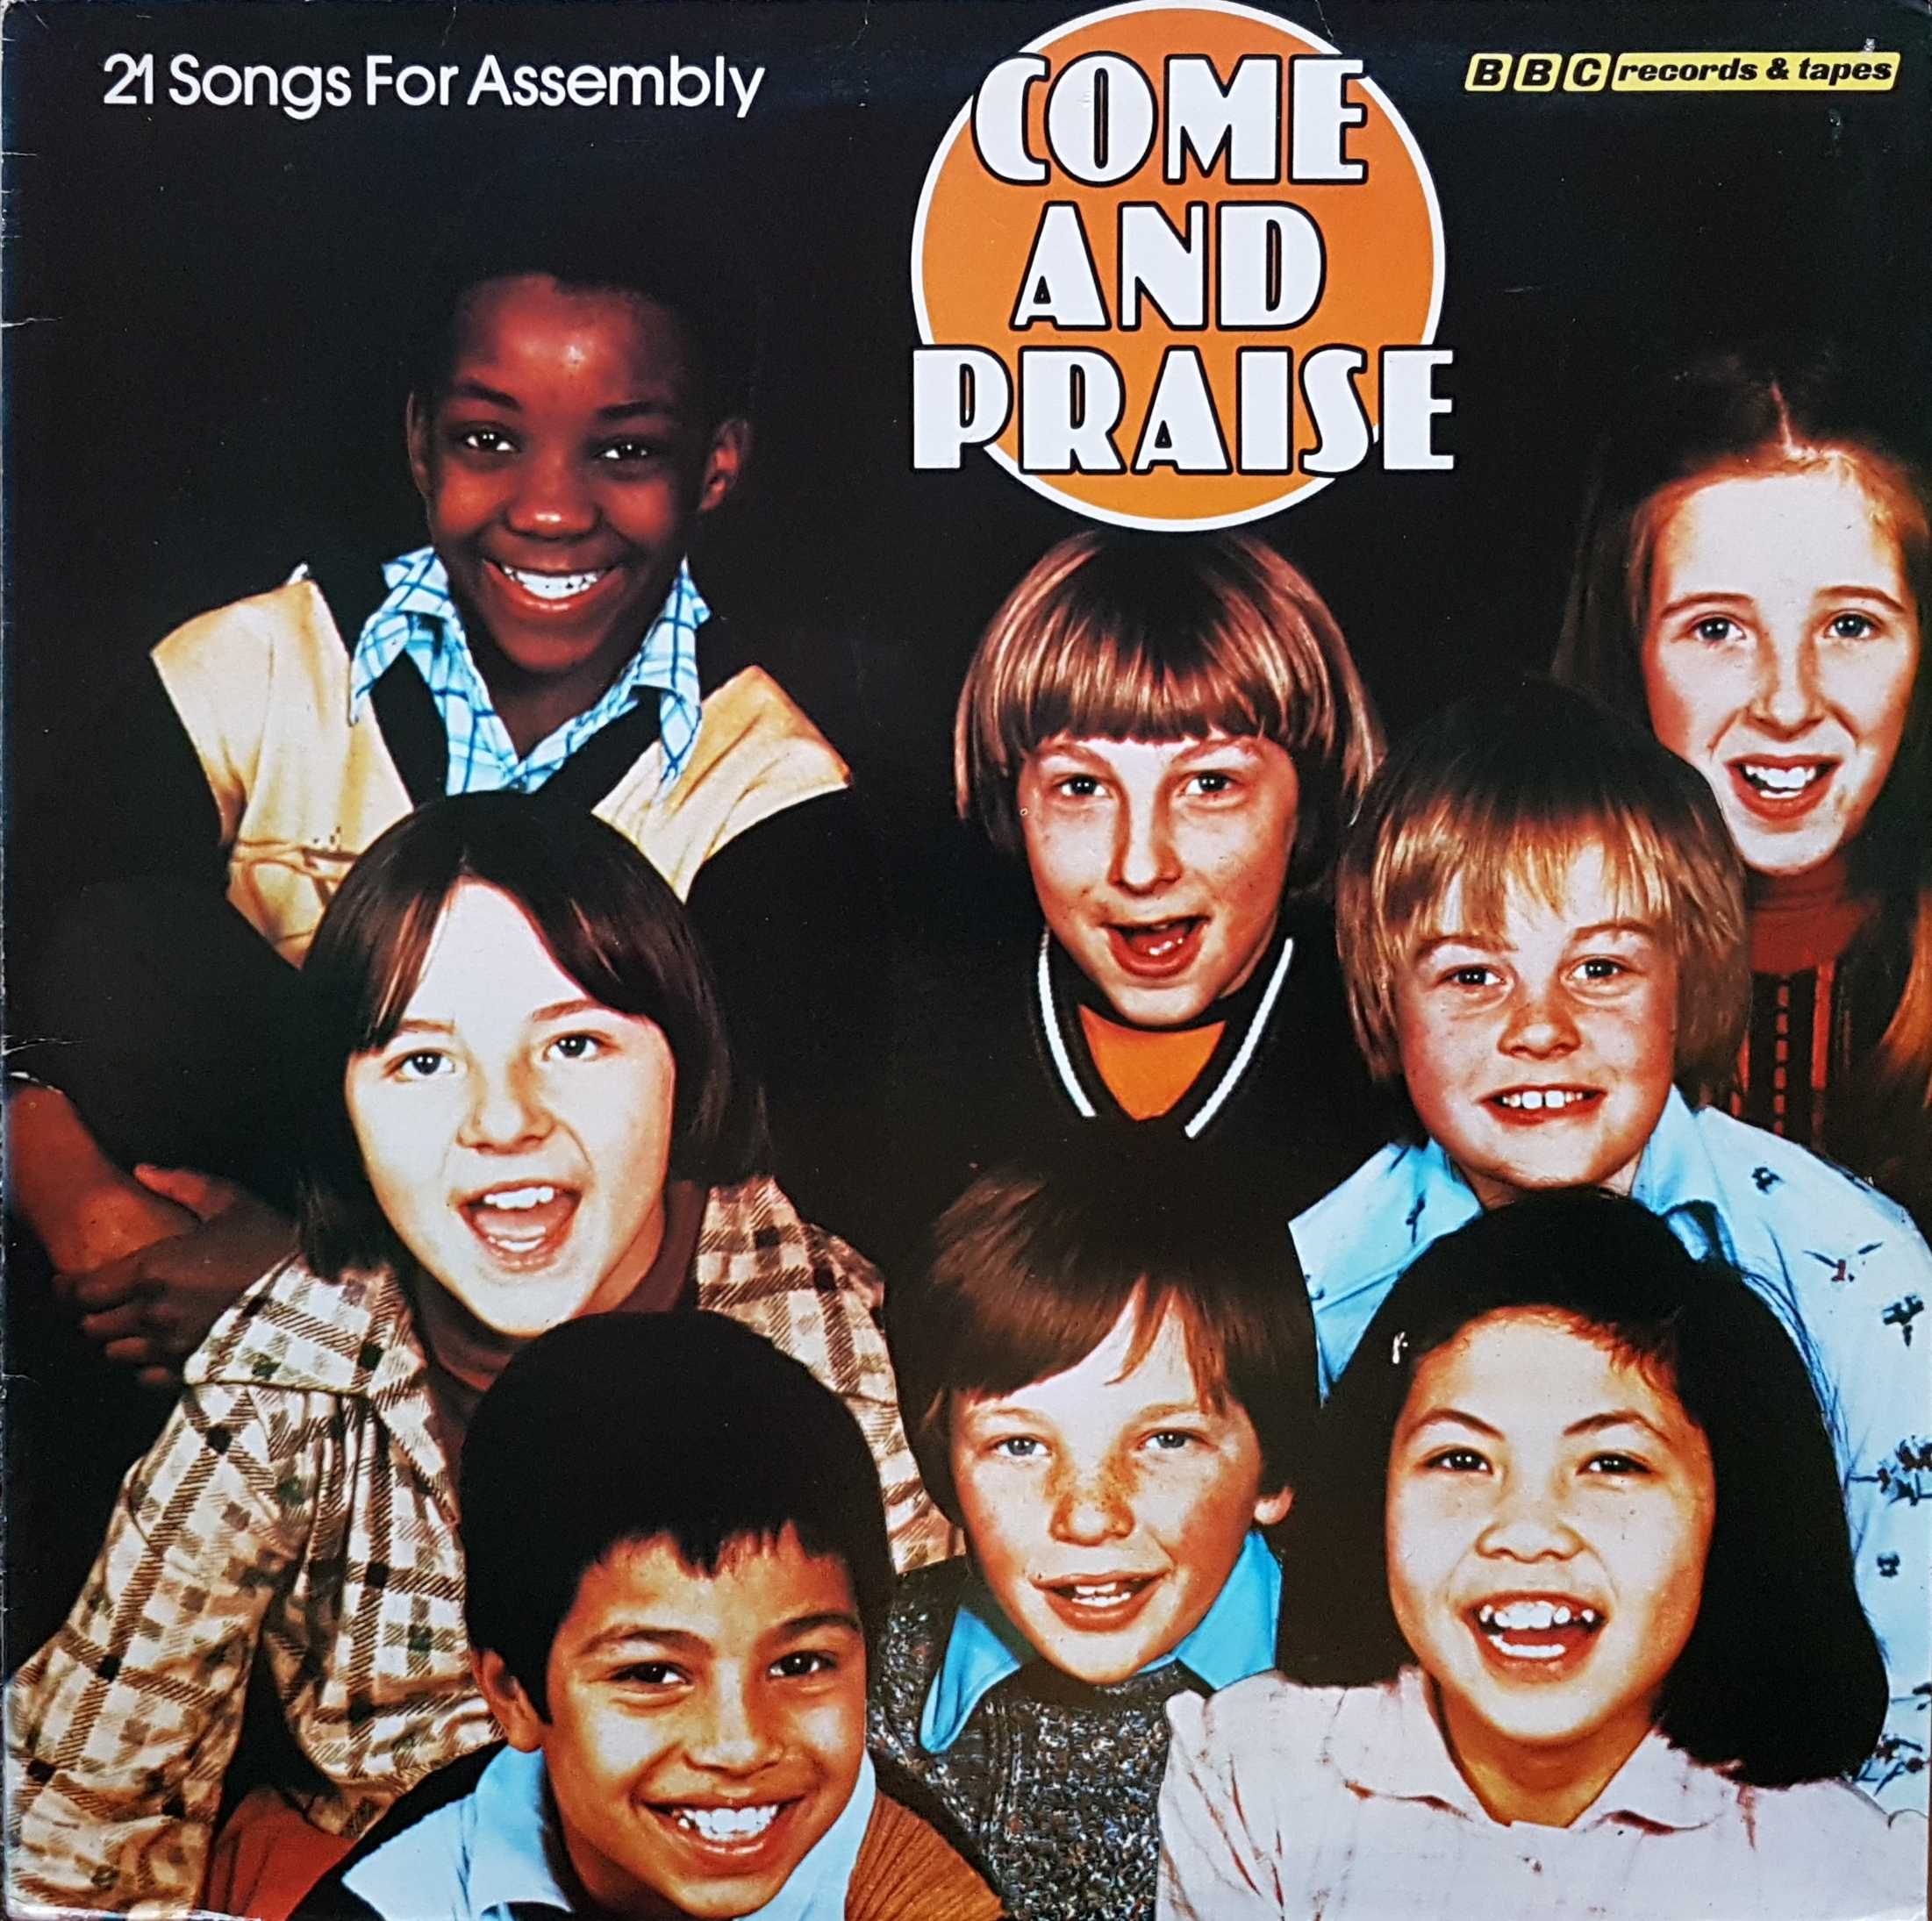 Picture of REC 317 Come & praise: 21 songs for assembly by artist Various from the BBC albums - Records and Tapes library